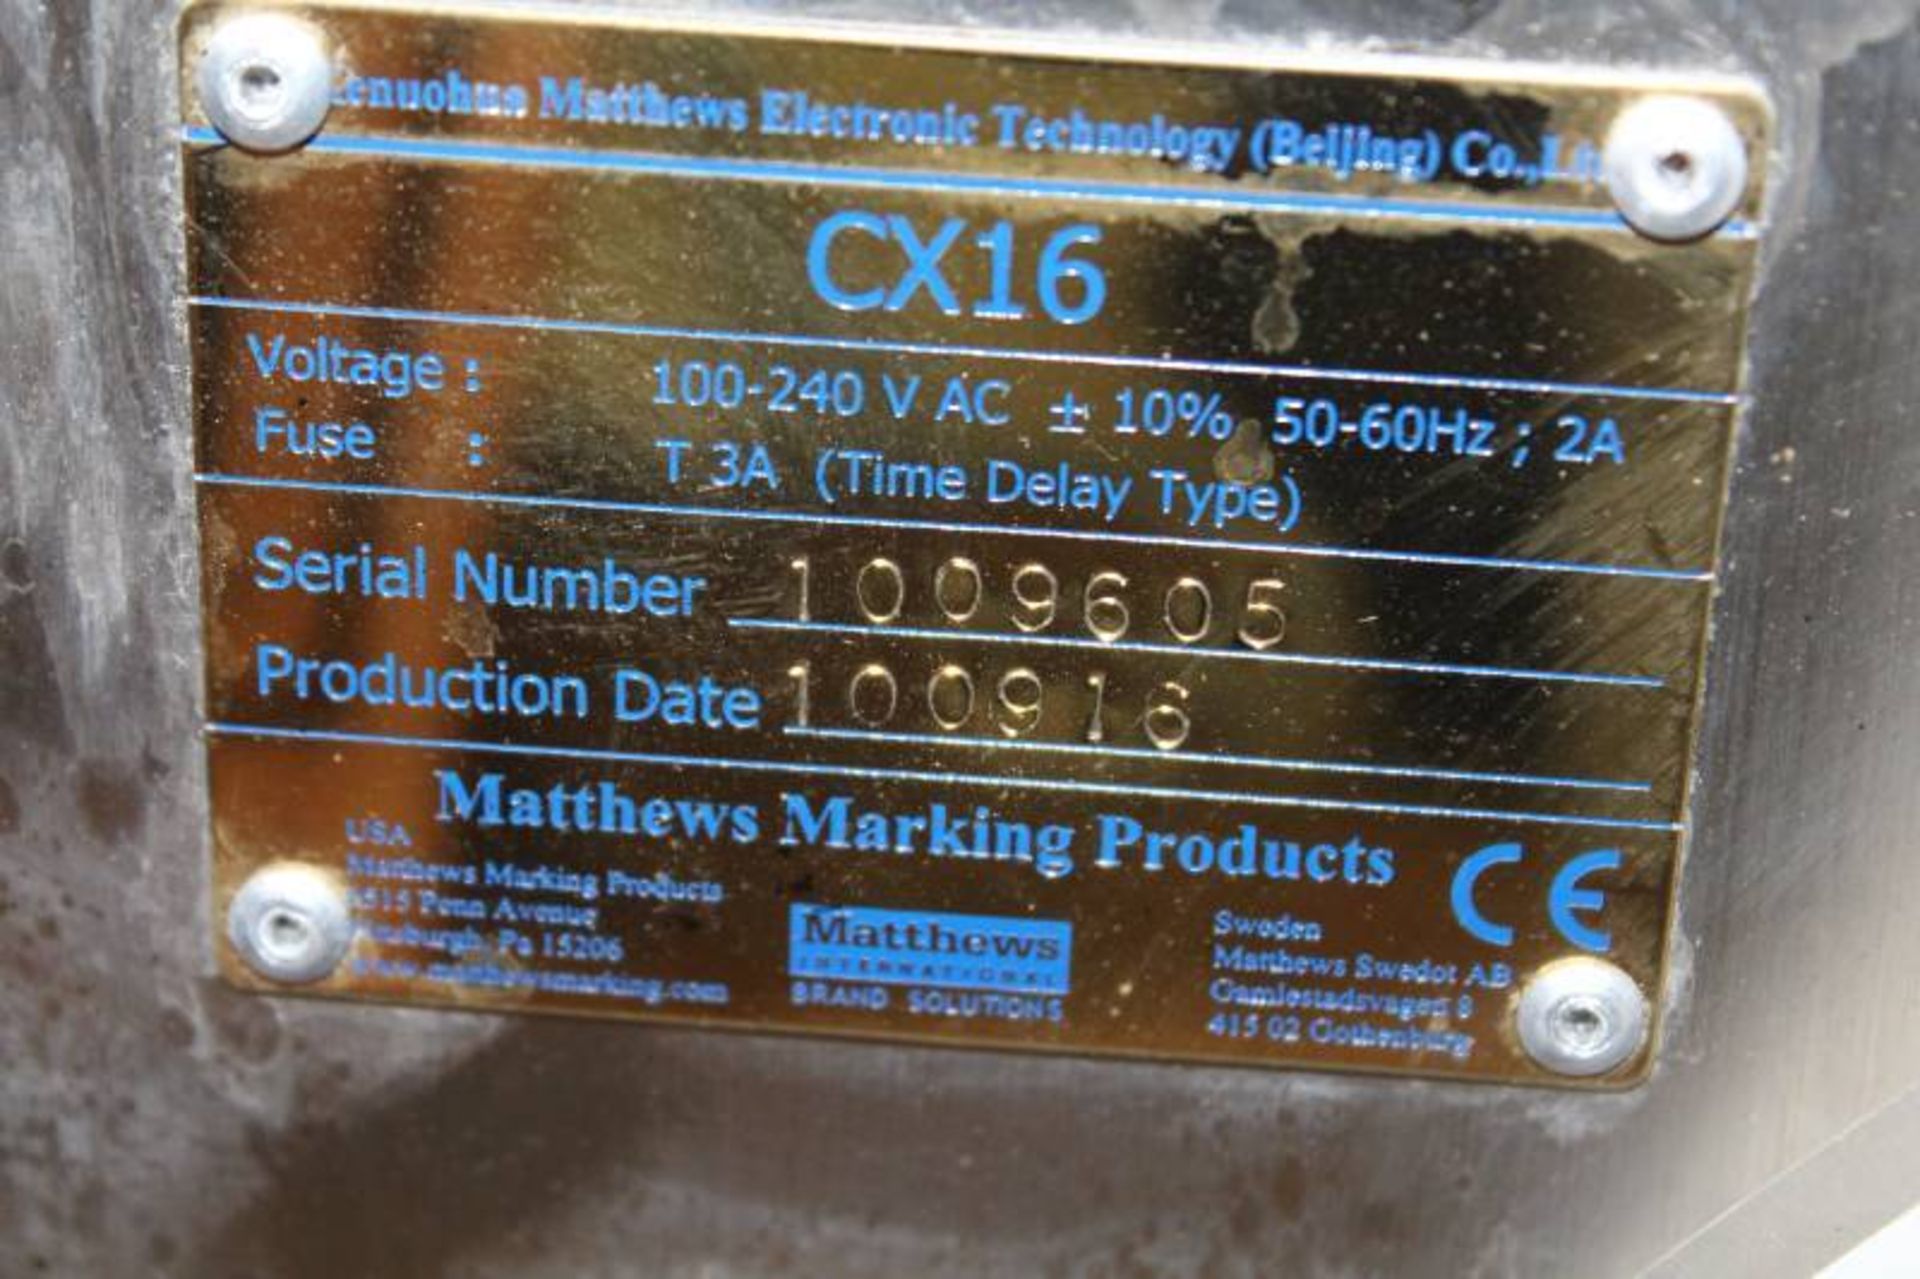 Mathews Ink Jet Coder. Model: CX16, Serial: 1009605, 100-240 Volts, 50-60 Hz, 2 Amp. As shown in - Image 8 of 8